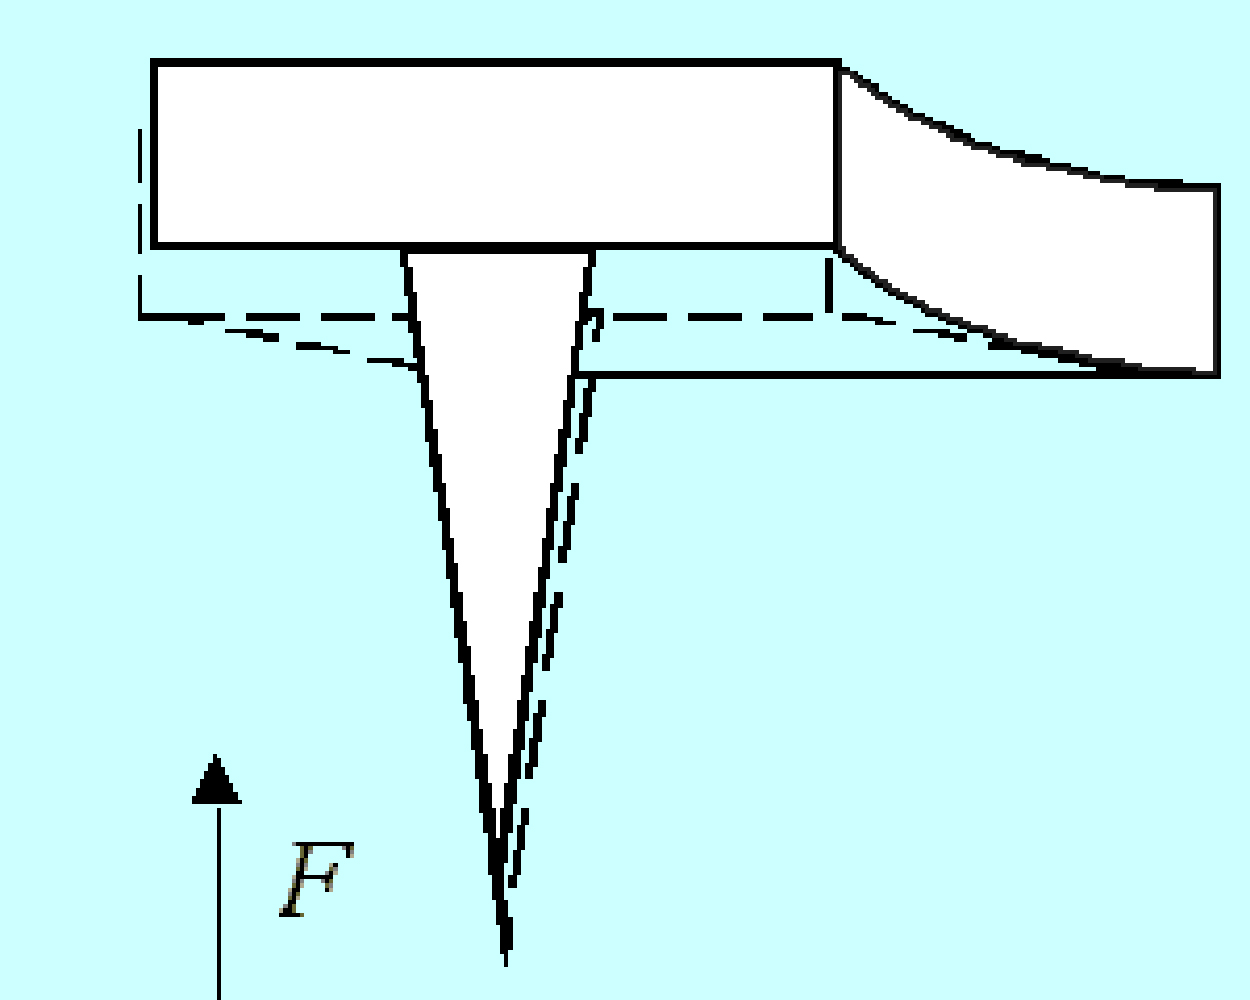 Fig.1.1. Schematic of vertical deflection of AFM cantilever